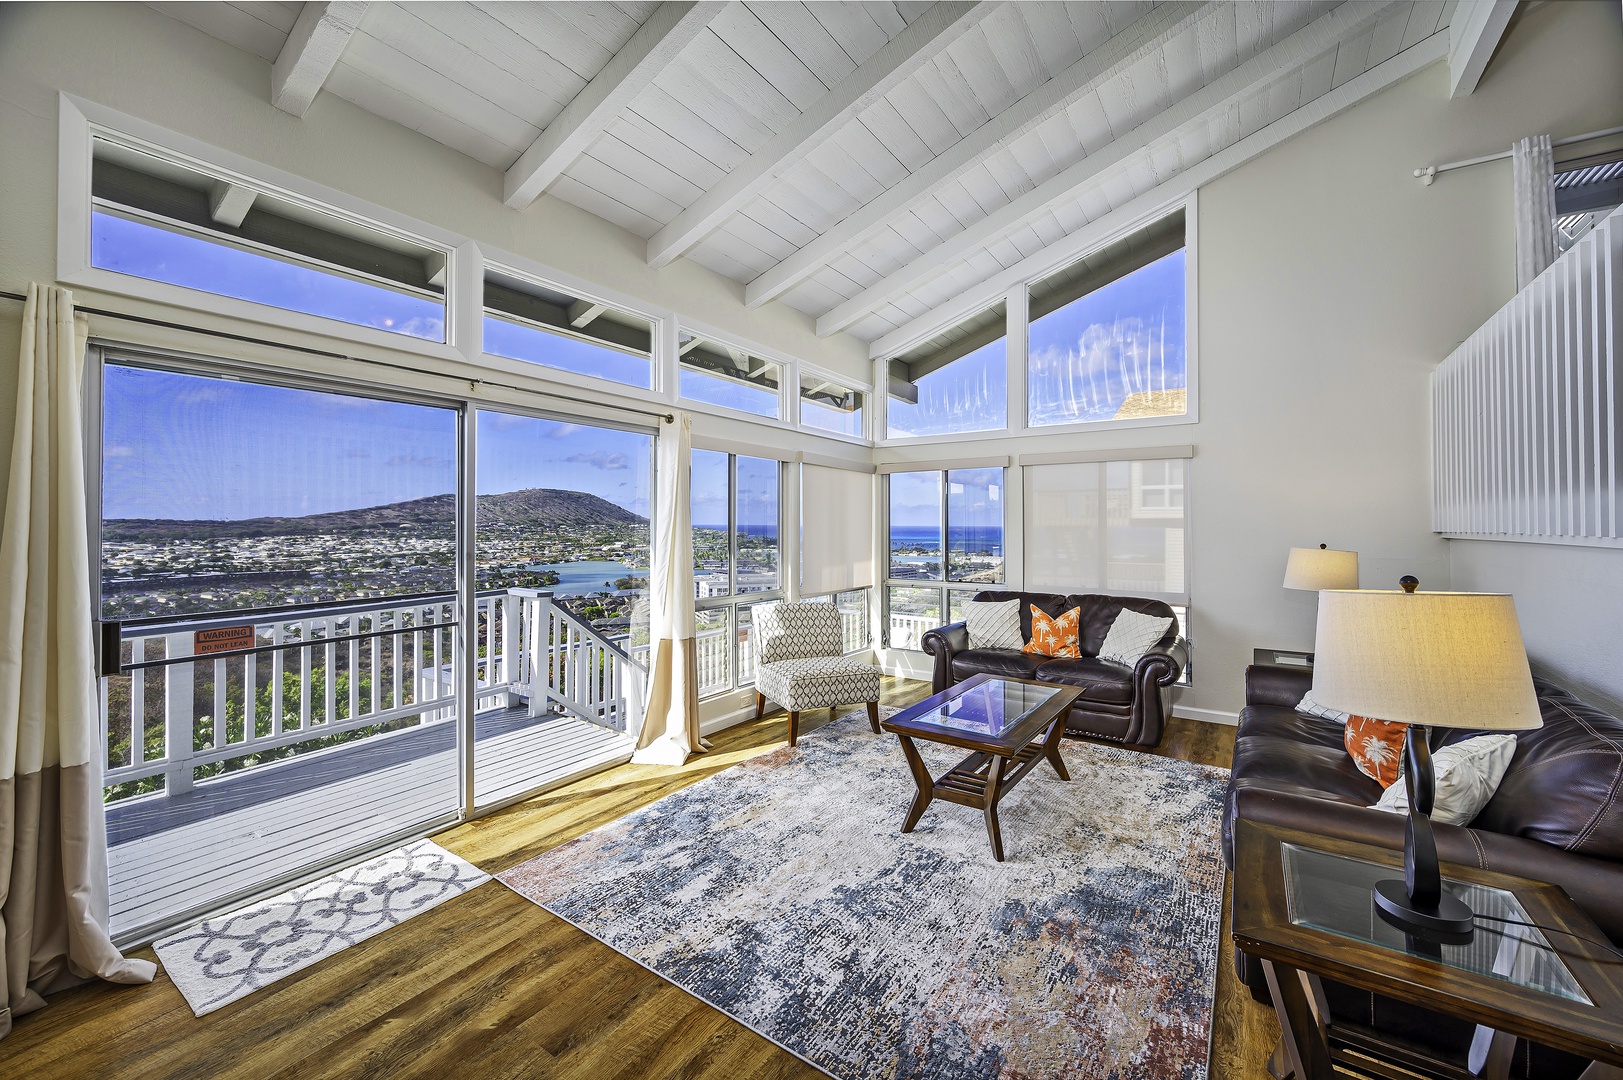 Honolulu Vacation Rentals, Hale Malia - The living area is drenched in natural light and has stellar views thanks to the large windows and sliding glass doors